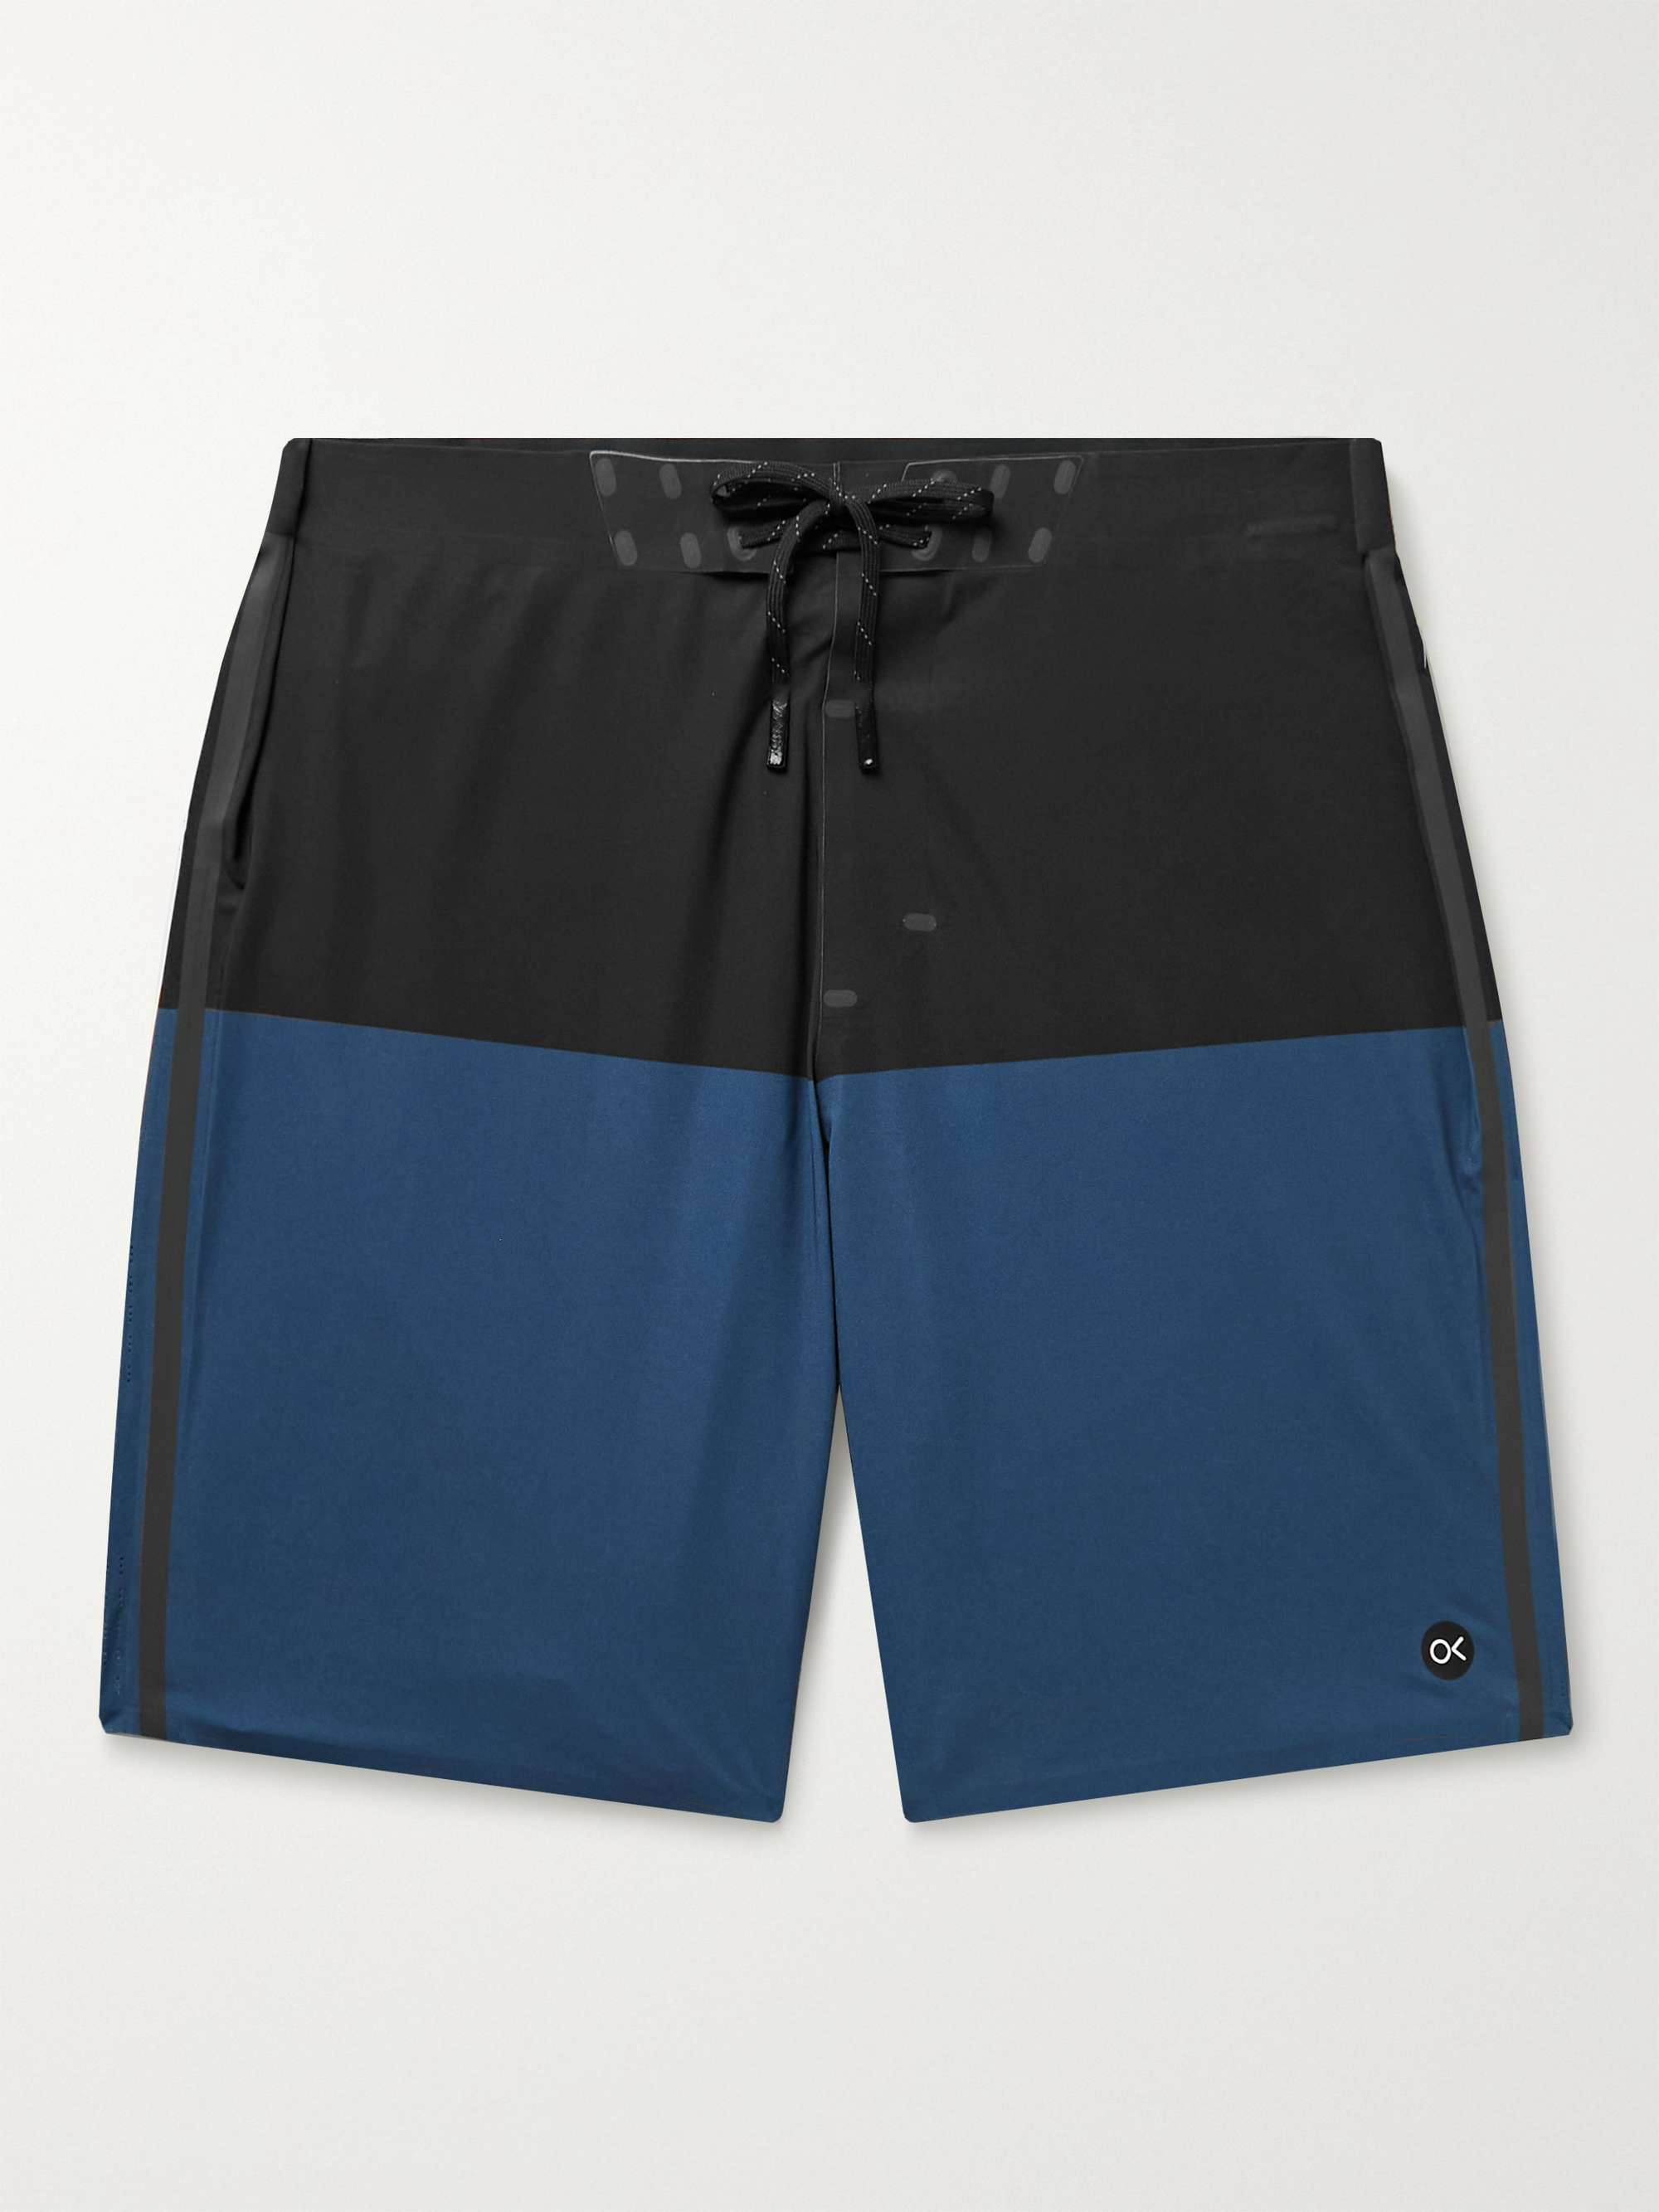 OUTERKNOWN Apex Long-Length Swim Shorts